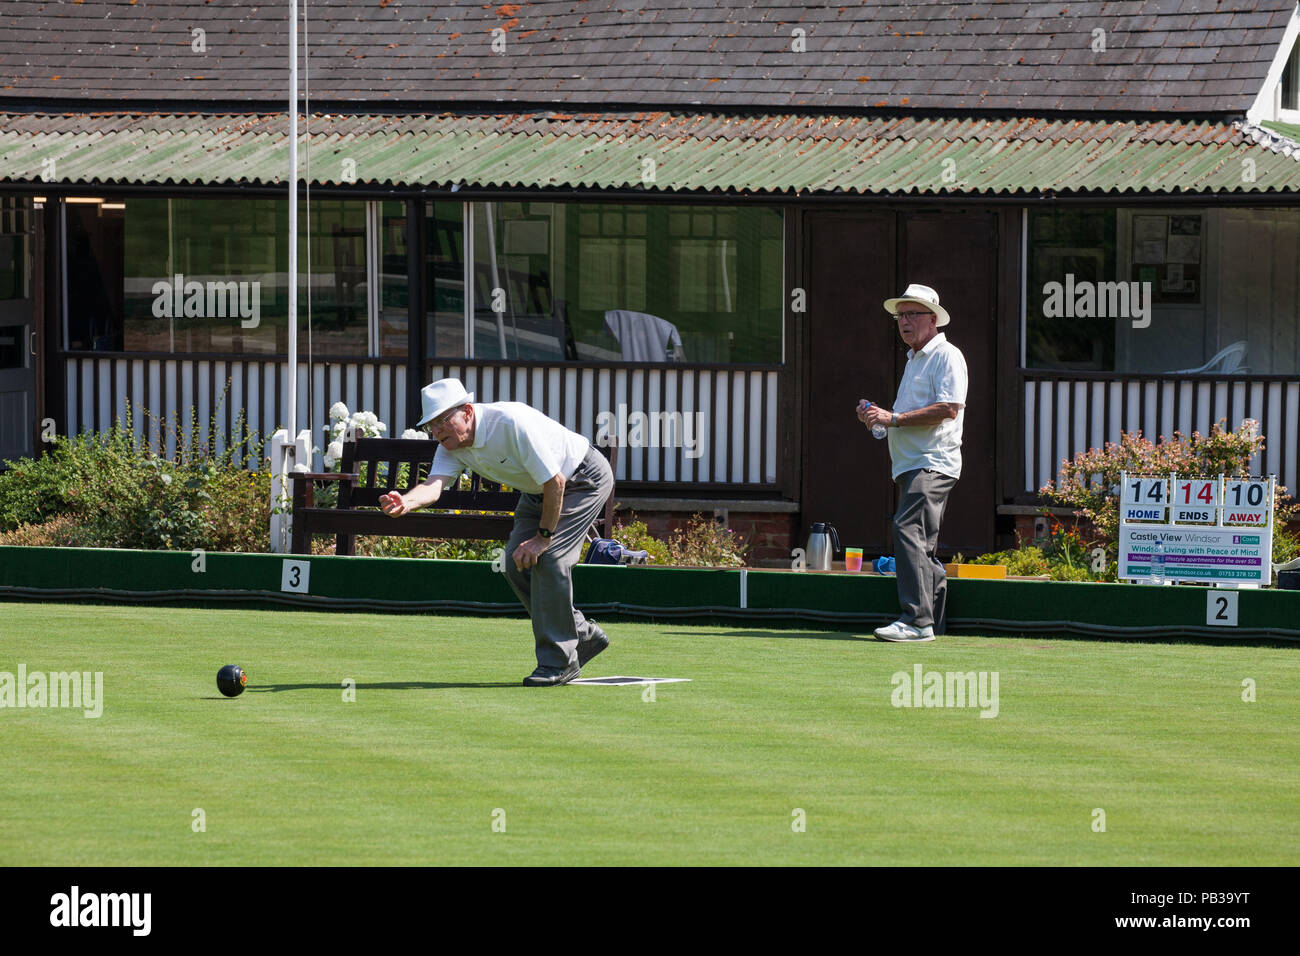 Windsor, UK. 26th July, 2018. Two men enjoy a game of bowls on a still pristine lawn at the Windsor and Eton Bowling Club on a very hot summer's day. Temperatures are expected to reach 36C today in the south-east. Even if imposed, sports facilities such as bowling clubs are often exempt from water restrictions during a drought. Credit: Mark Kerrison/Alamy Live News Stock Photo